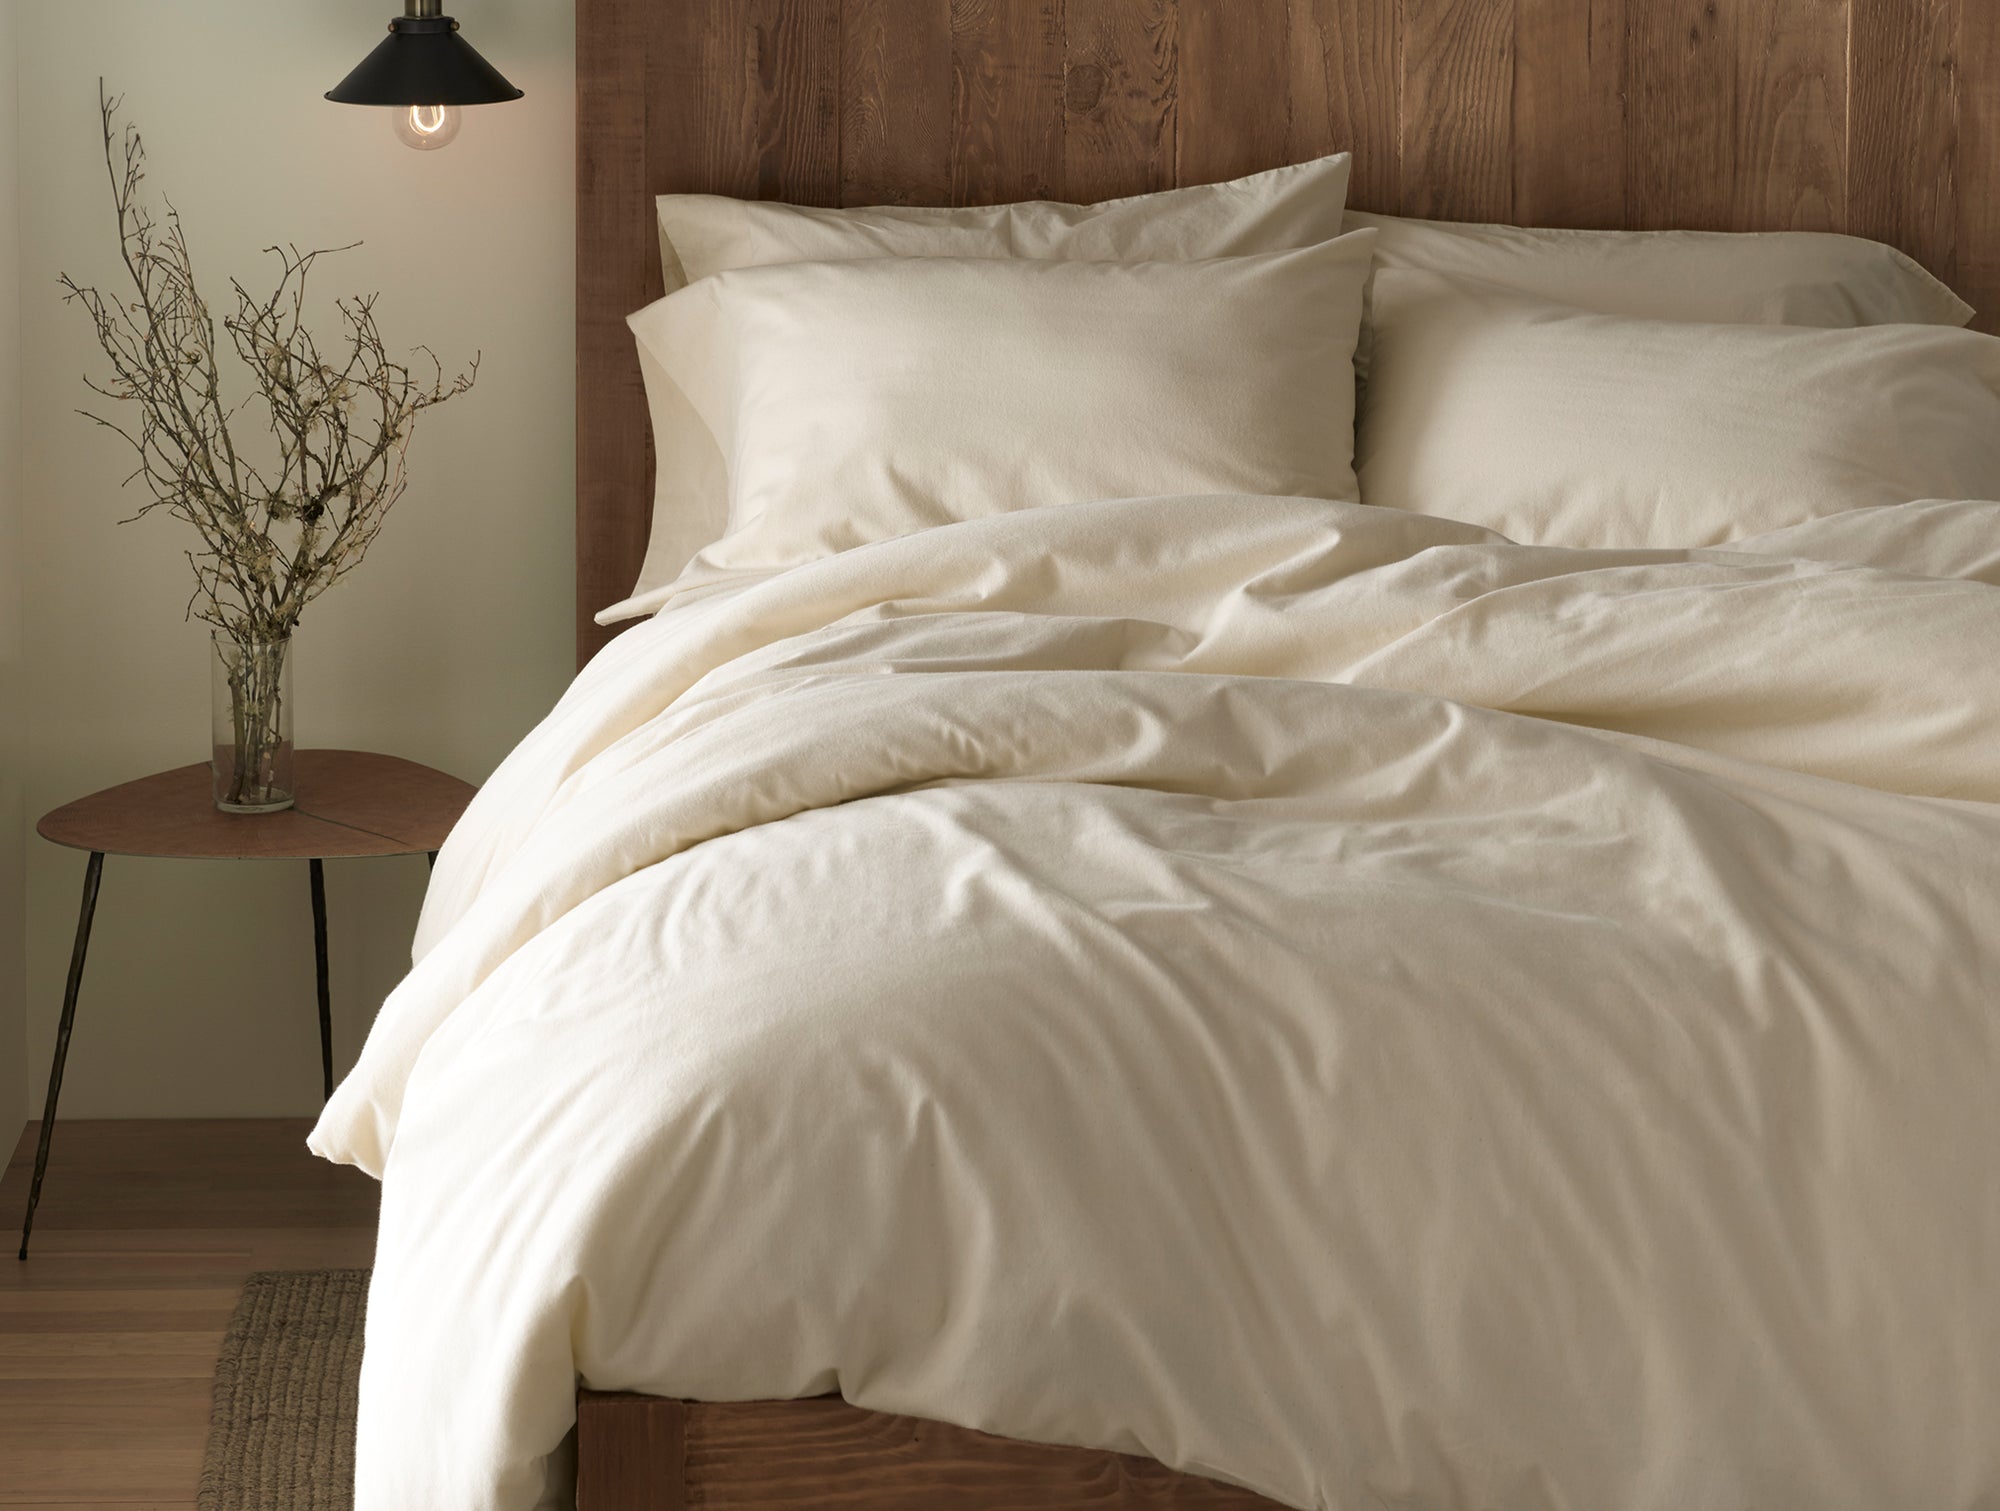 Cloud Brushed™ Organic Flannel Bedding Set in King